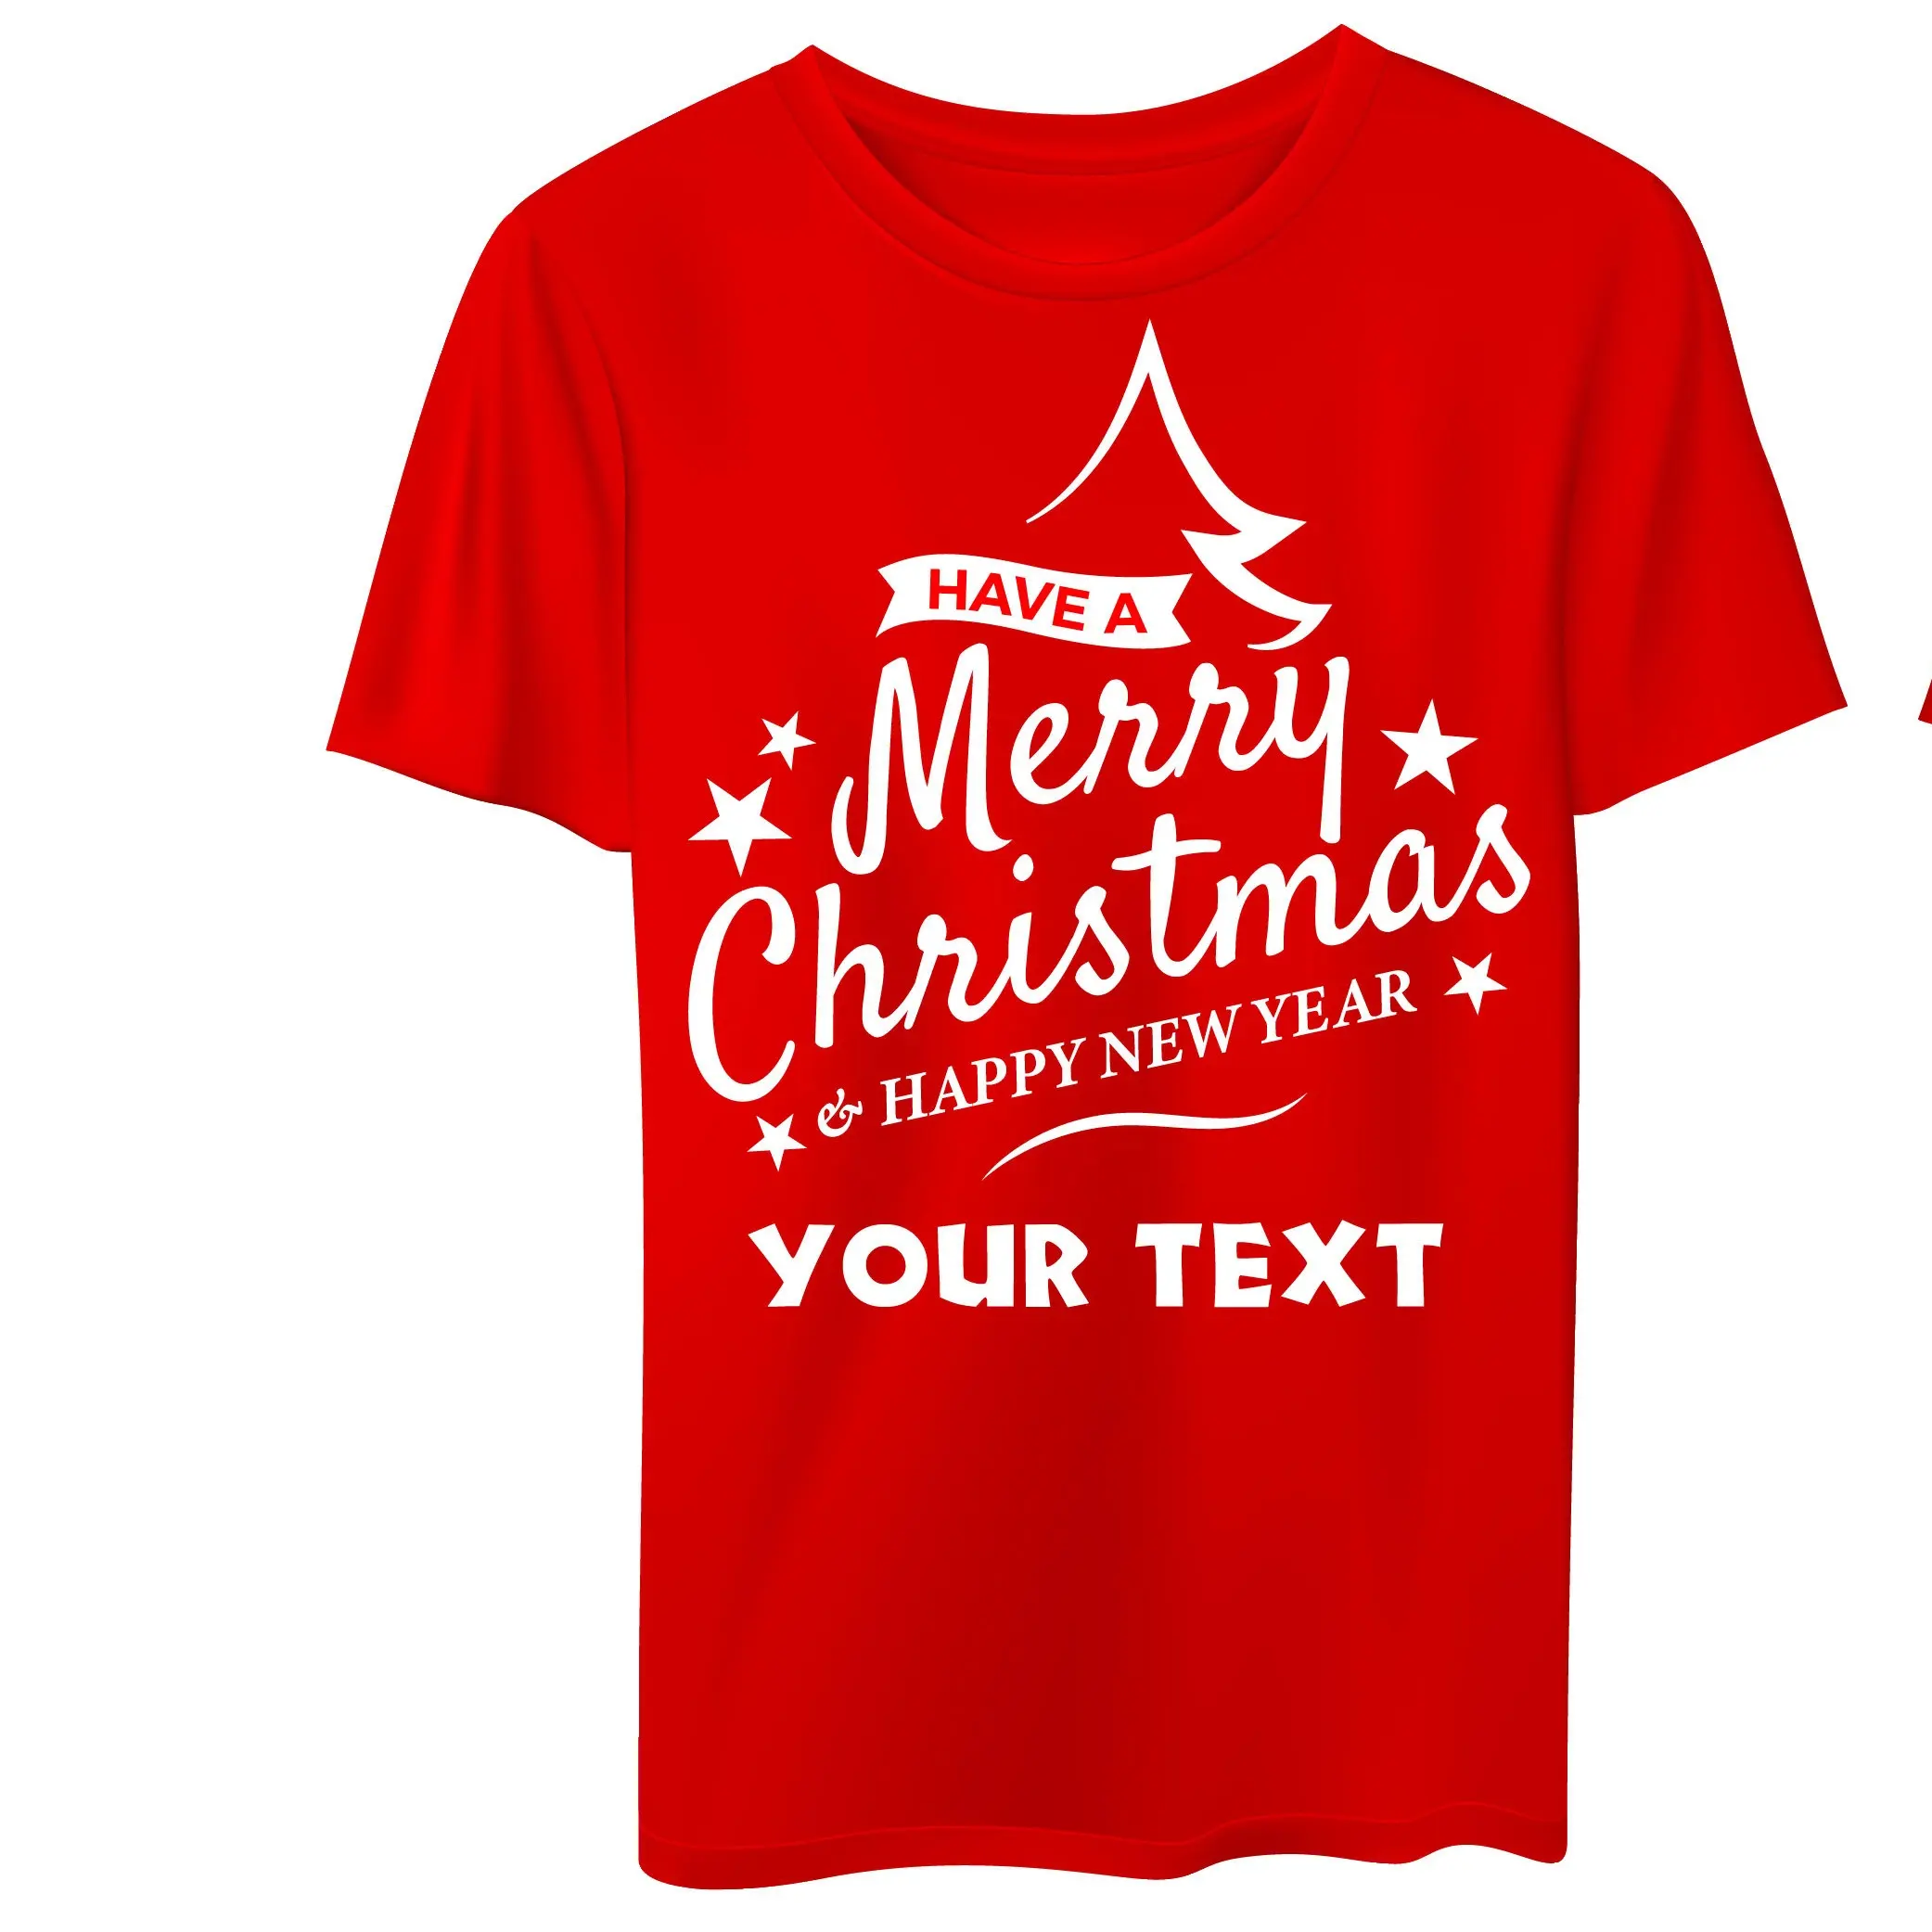 2021 christmas branded tee t shirt design your own unisex tshirts